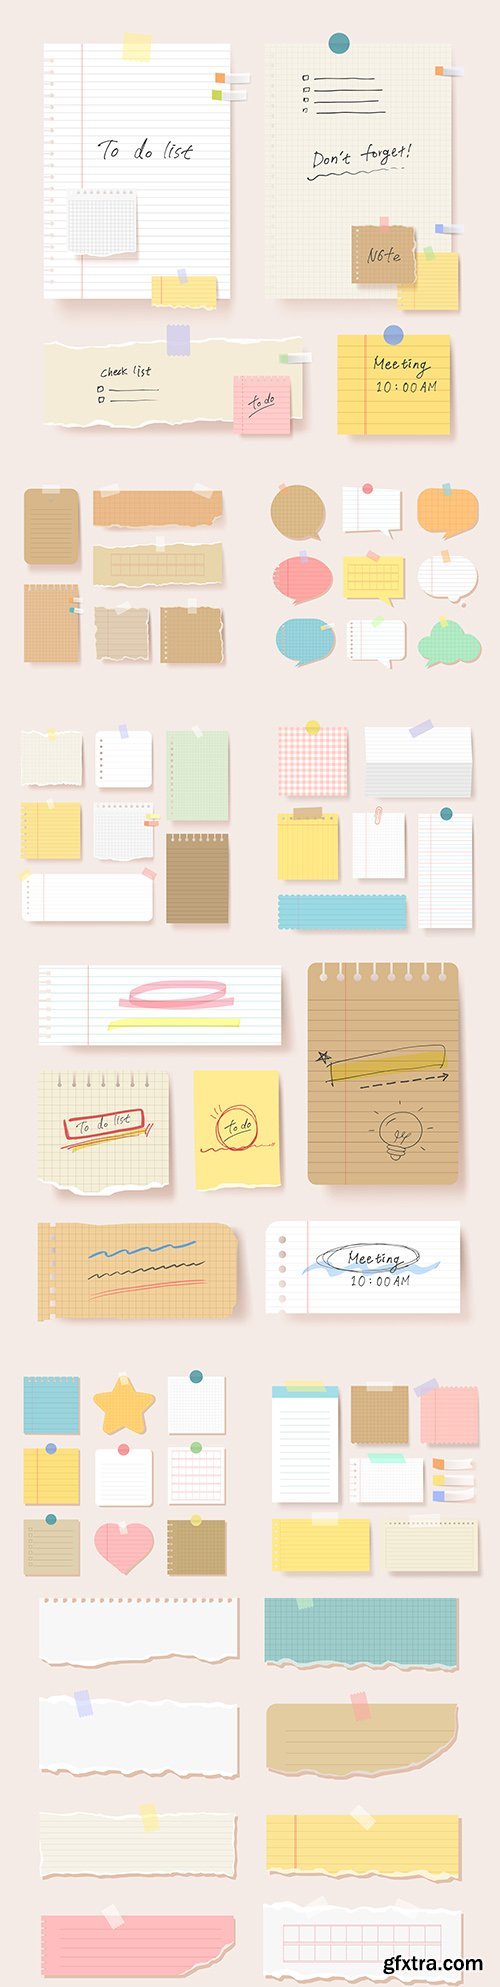 Clipping papers blank pages notebook illustration